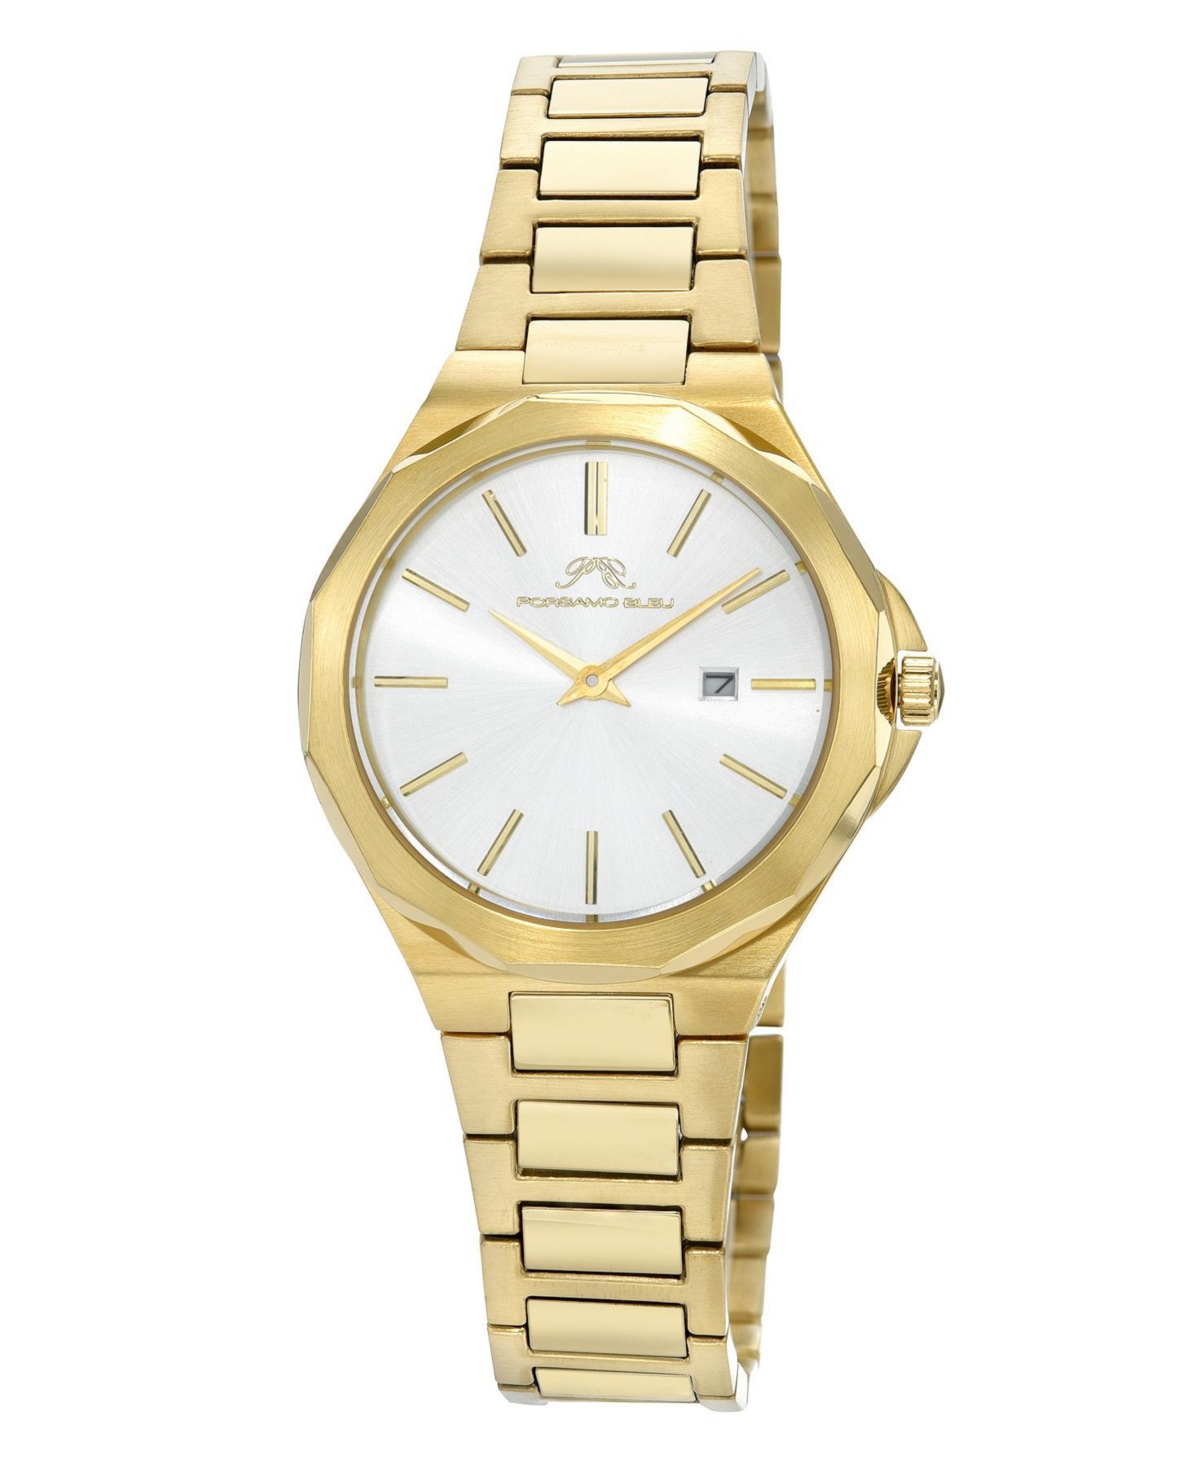 Victoria Stainless Steel Gold Tone Women's Watch 1241BVIS - Gold